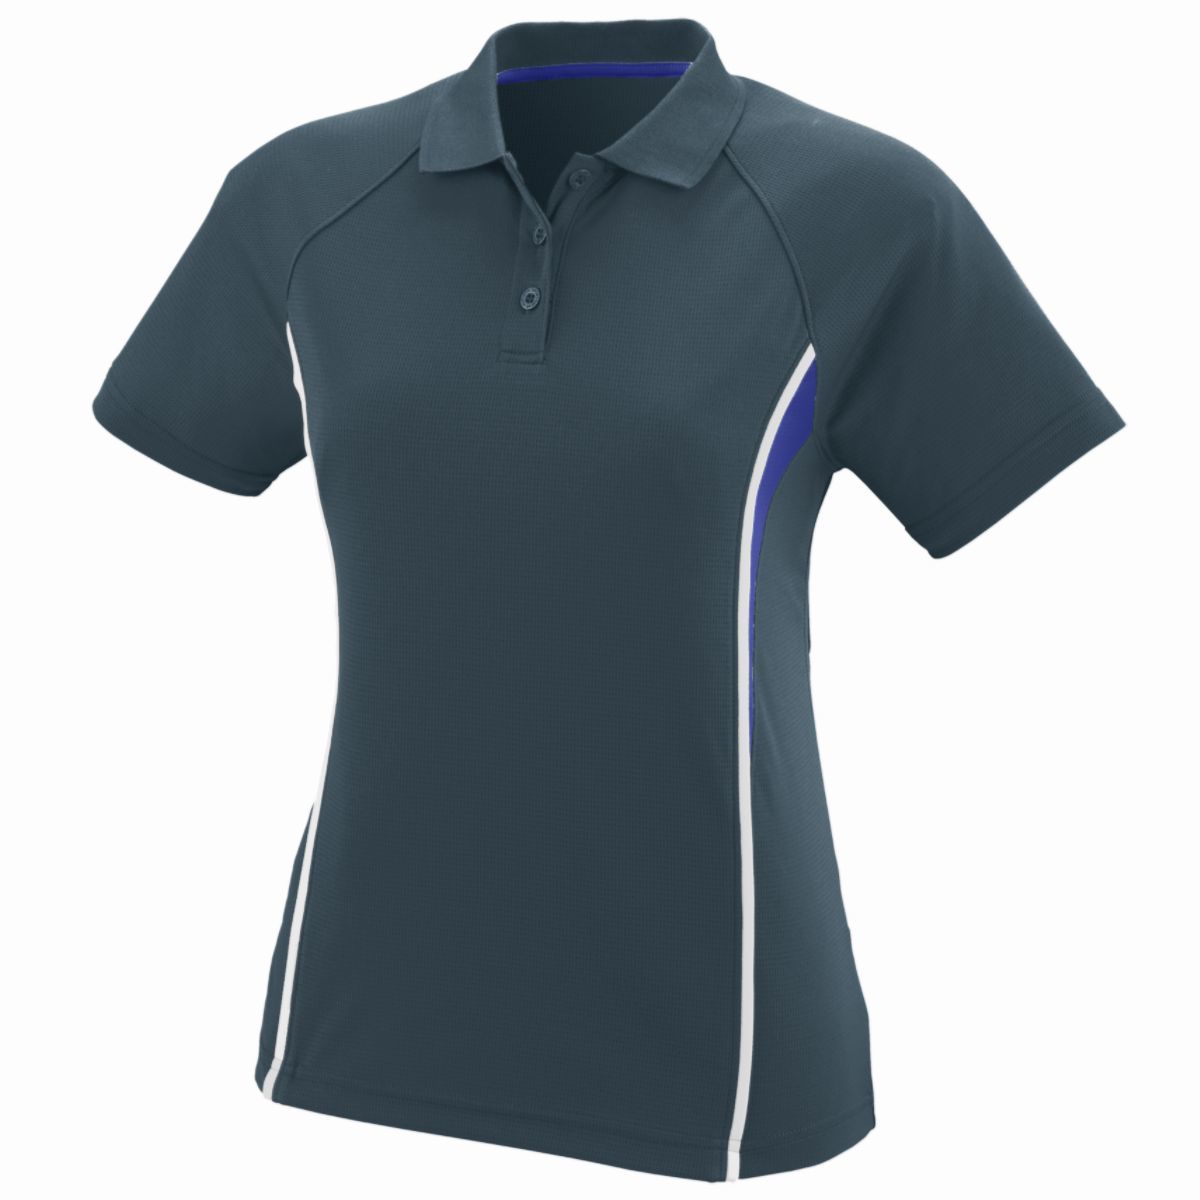 Augusta Sportswear Ladies Rival Polo in Slate/Purple/White  -Part of the Ladies, Ladies-Polo, Polos, Augusta-Products, Shirts product lines at KanaleyCreations.com